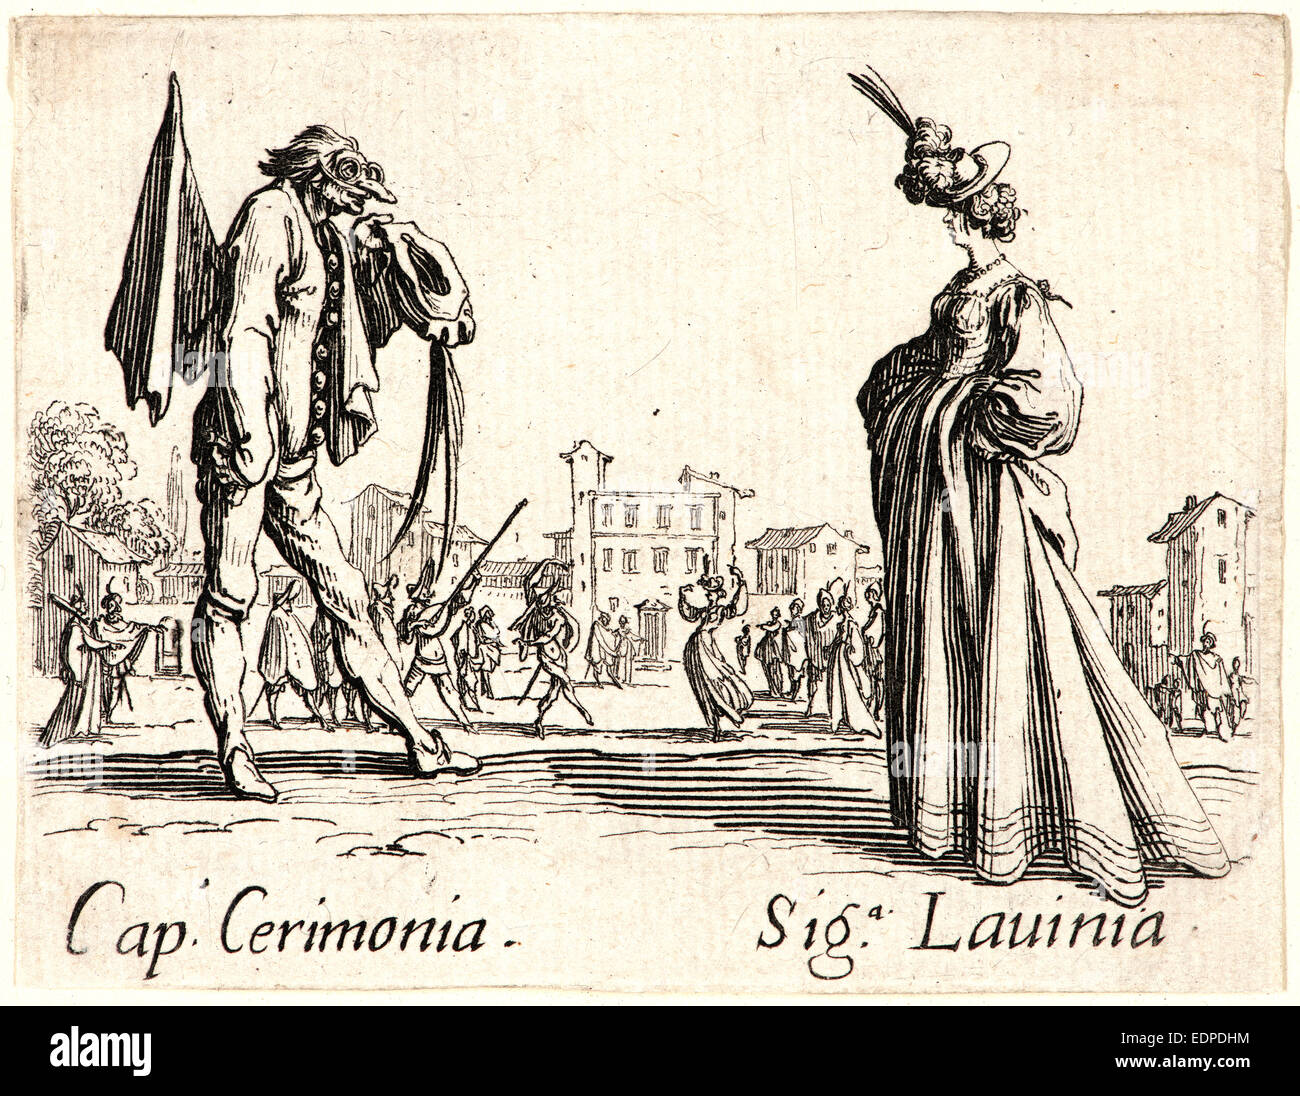 Jacques Callot (French, 1592 - 1635). Cap. Cerimonia and Sig. Lavinia, 1622 and later. From Balli di Sfessania. Etching Stock Photo